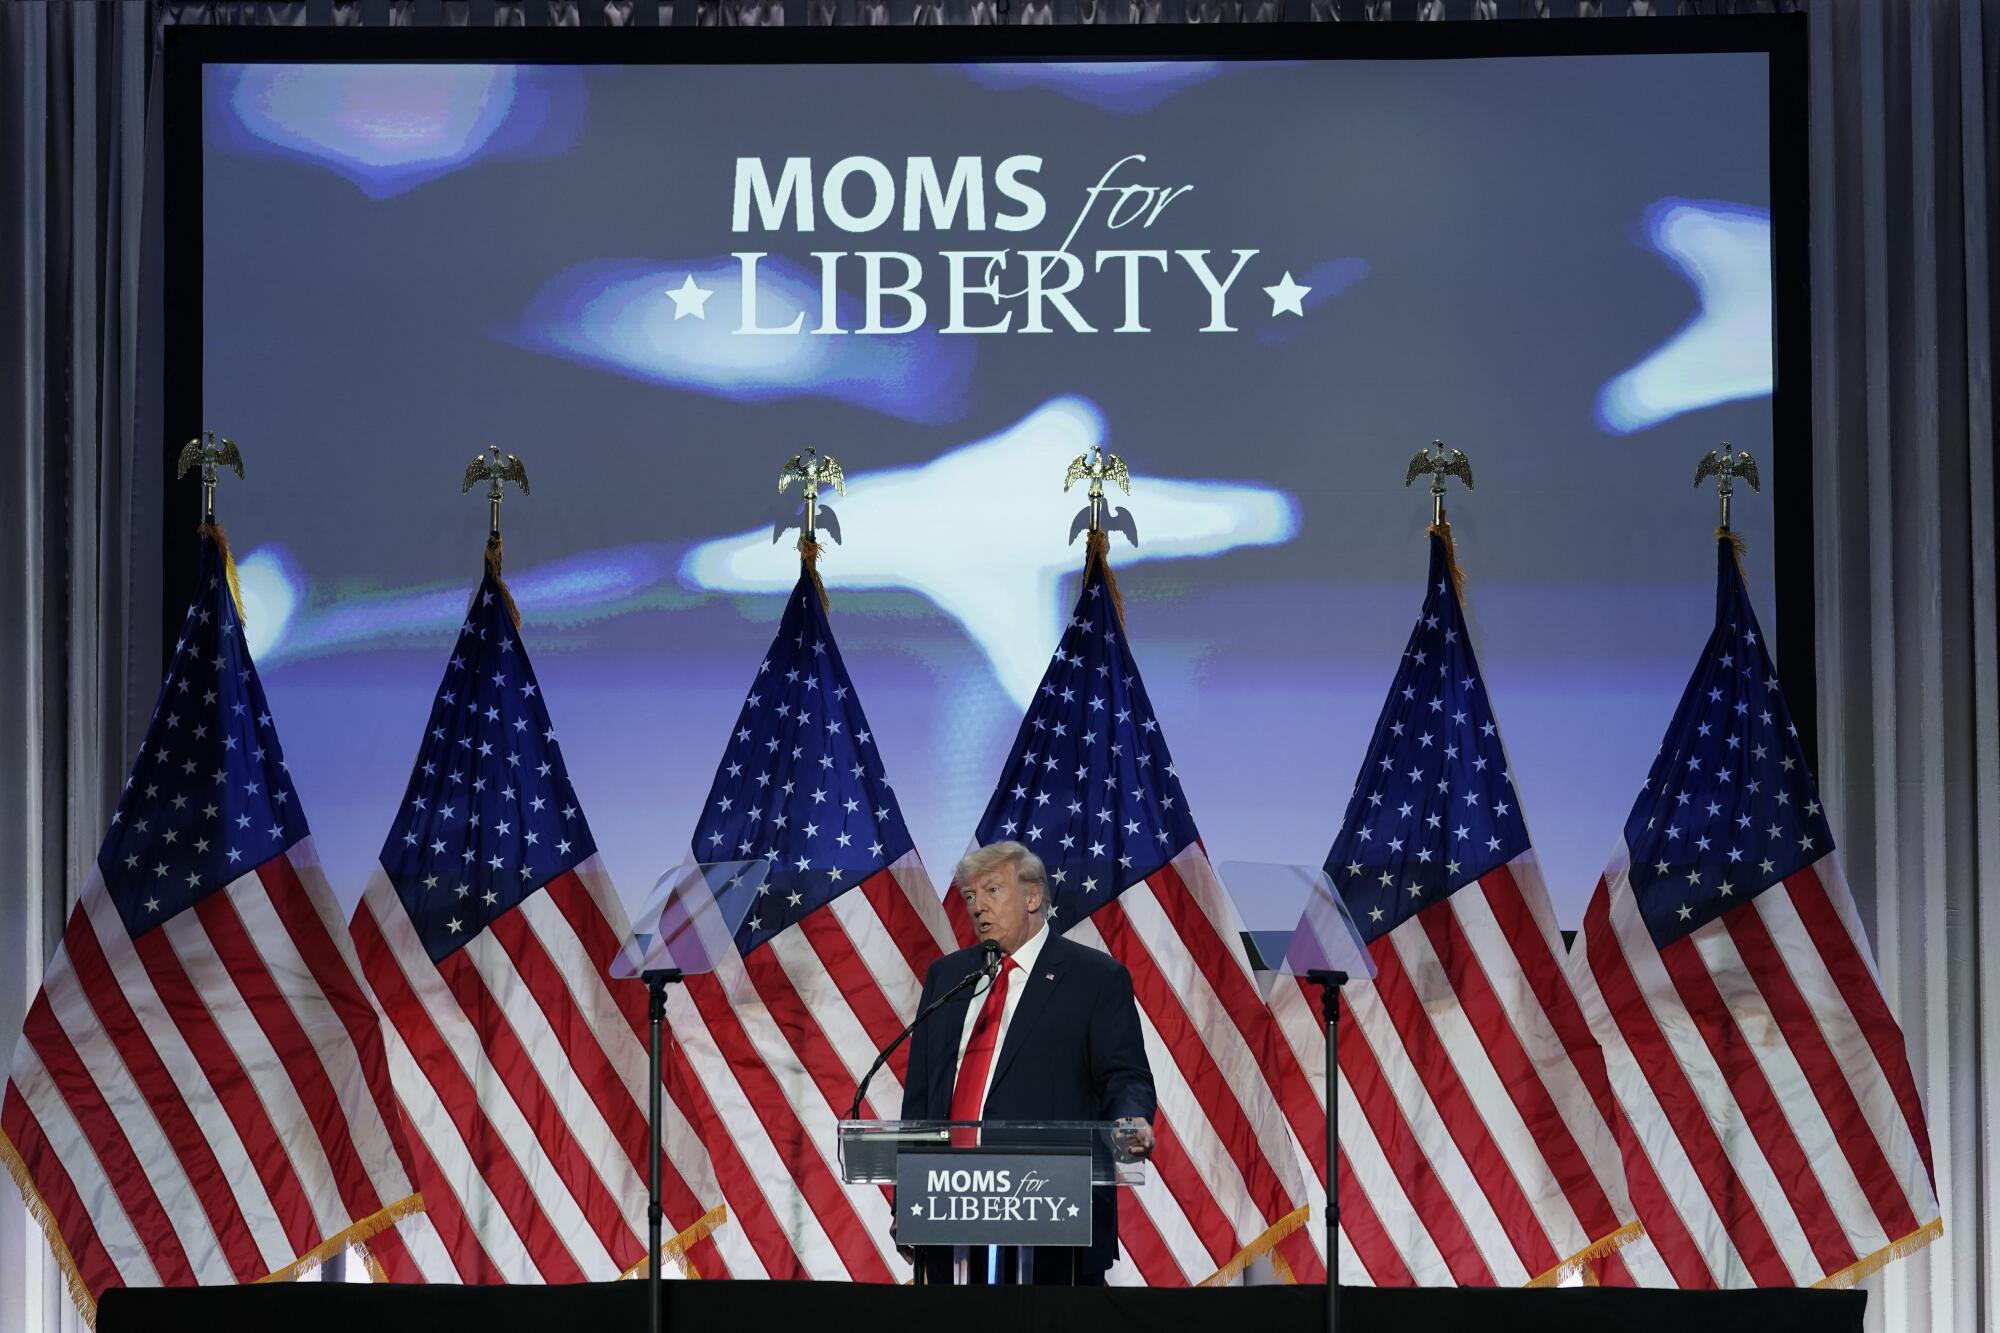 Former President Donald Trump speaking under the words Moms for Liberty and in front of several American flags.